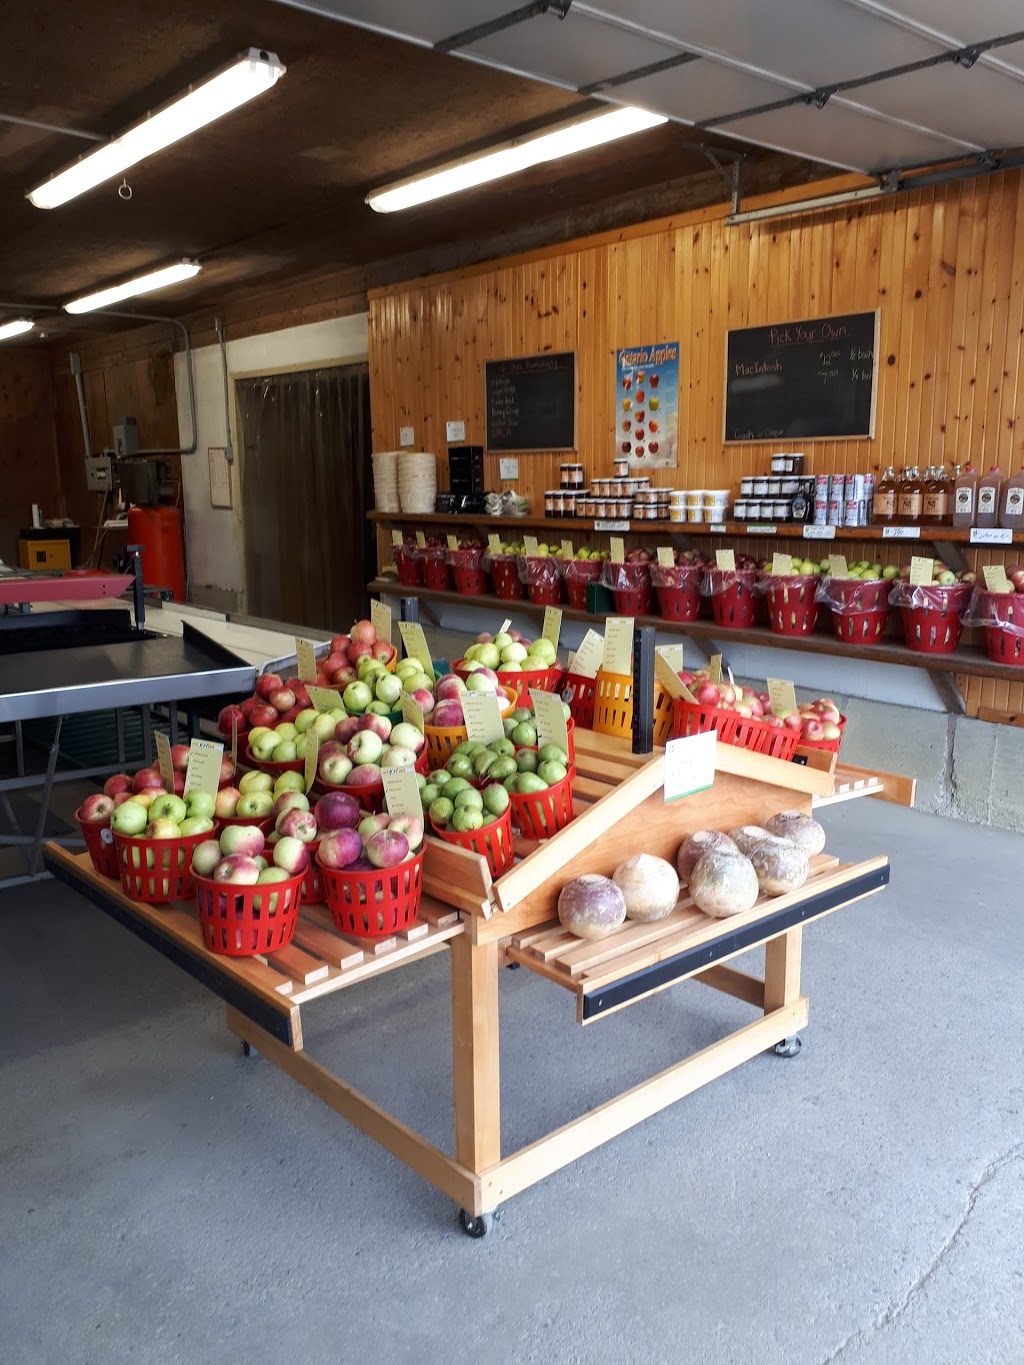 Blakes Apple Orchard | 42933 St Michaels Rd, Brussels, ON N0G 1H0, Canada | Phone: (519) 887-6972